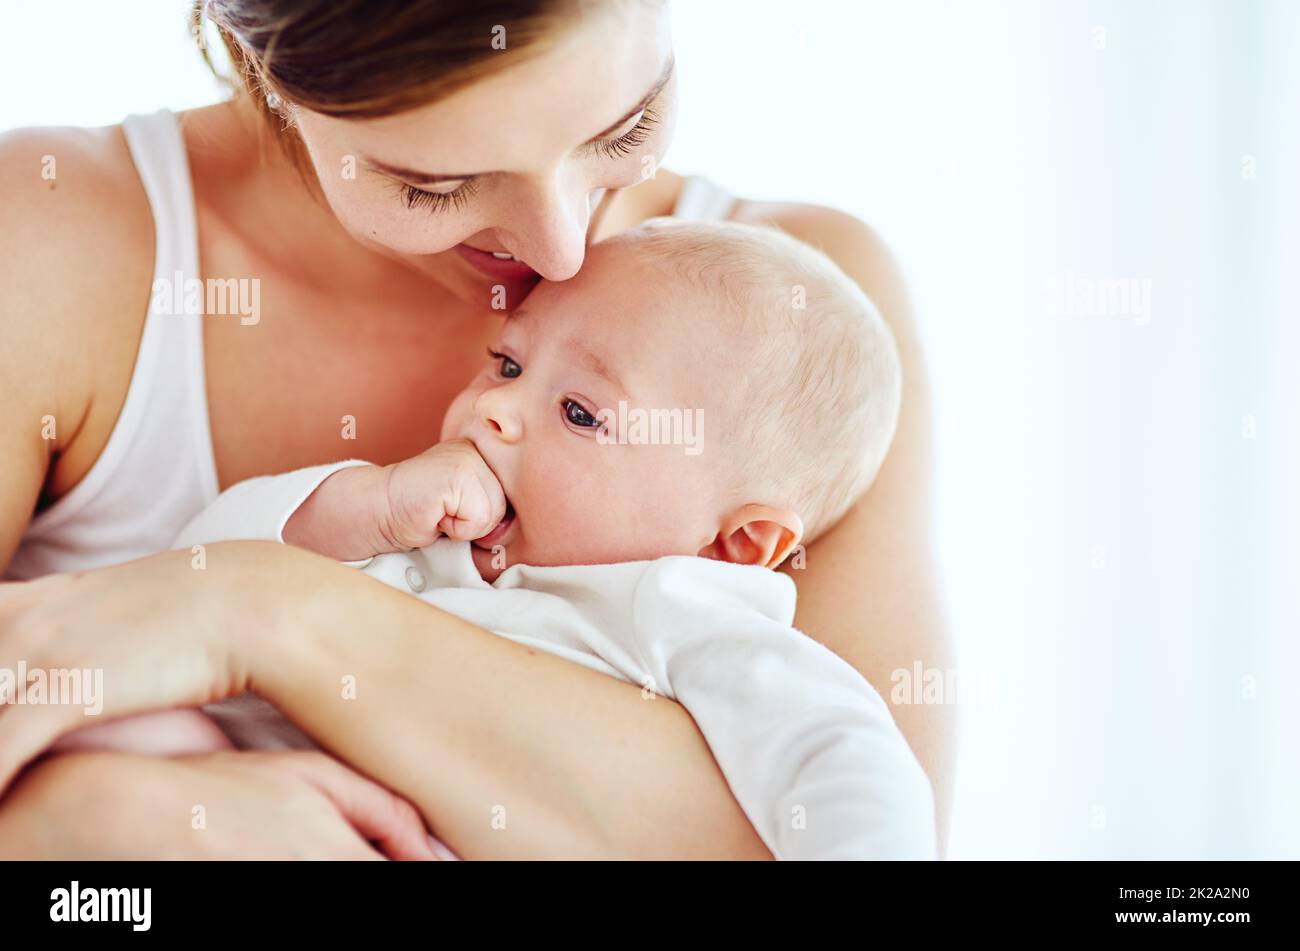 Tender moments with Mom. Shot of an adorable baby boy bonding with his mother at home. Stock Photo